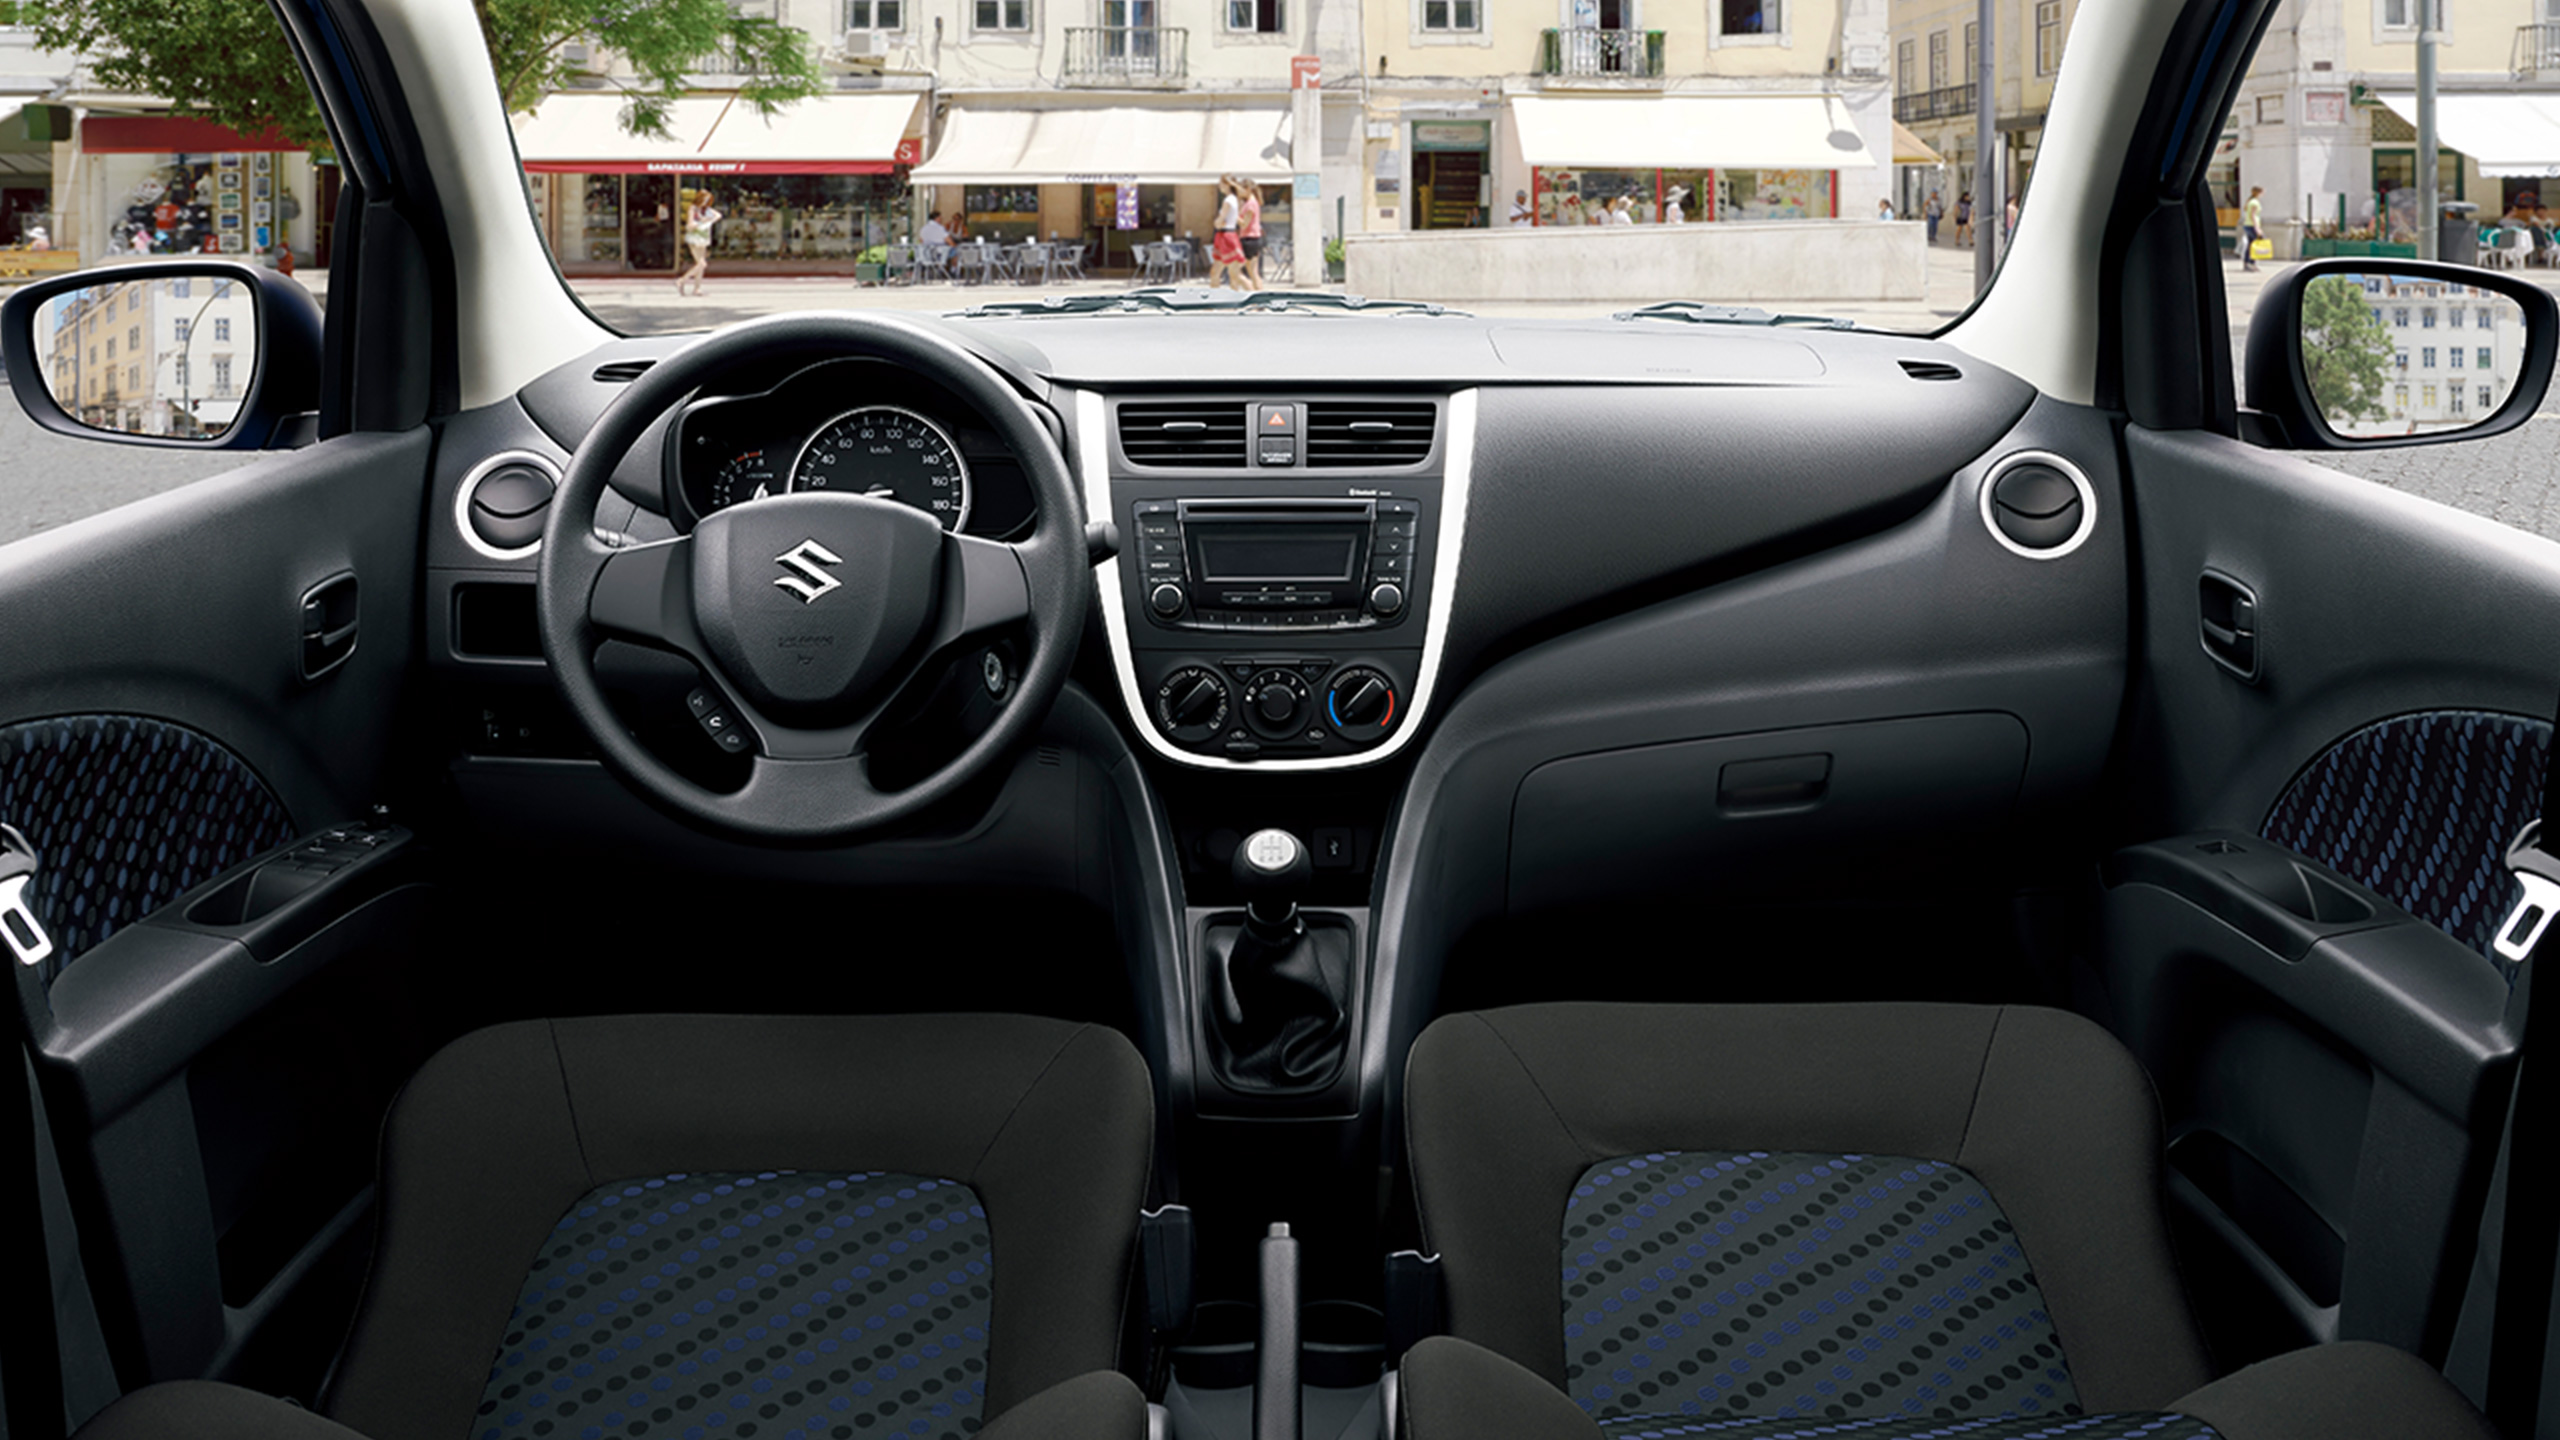 Celerio-dashboard-view-with-café-outside